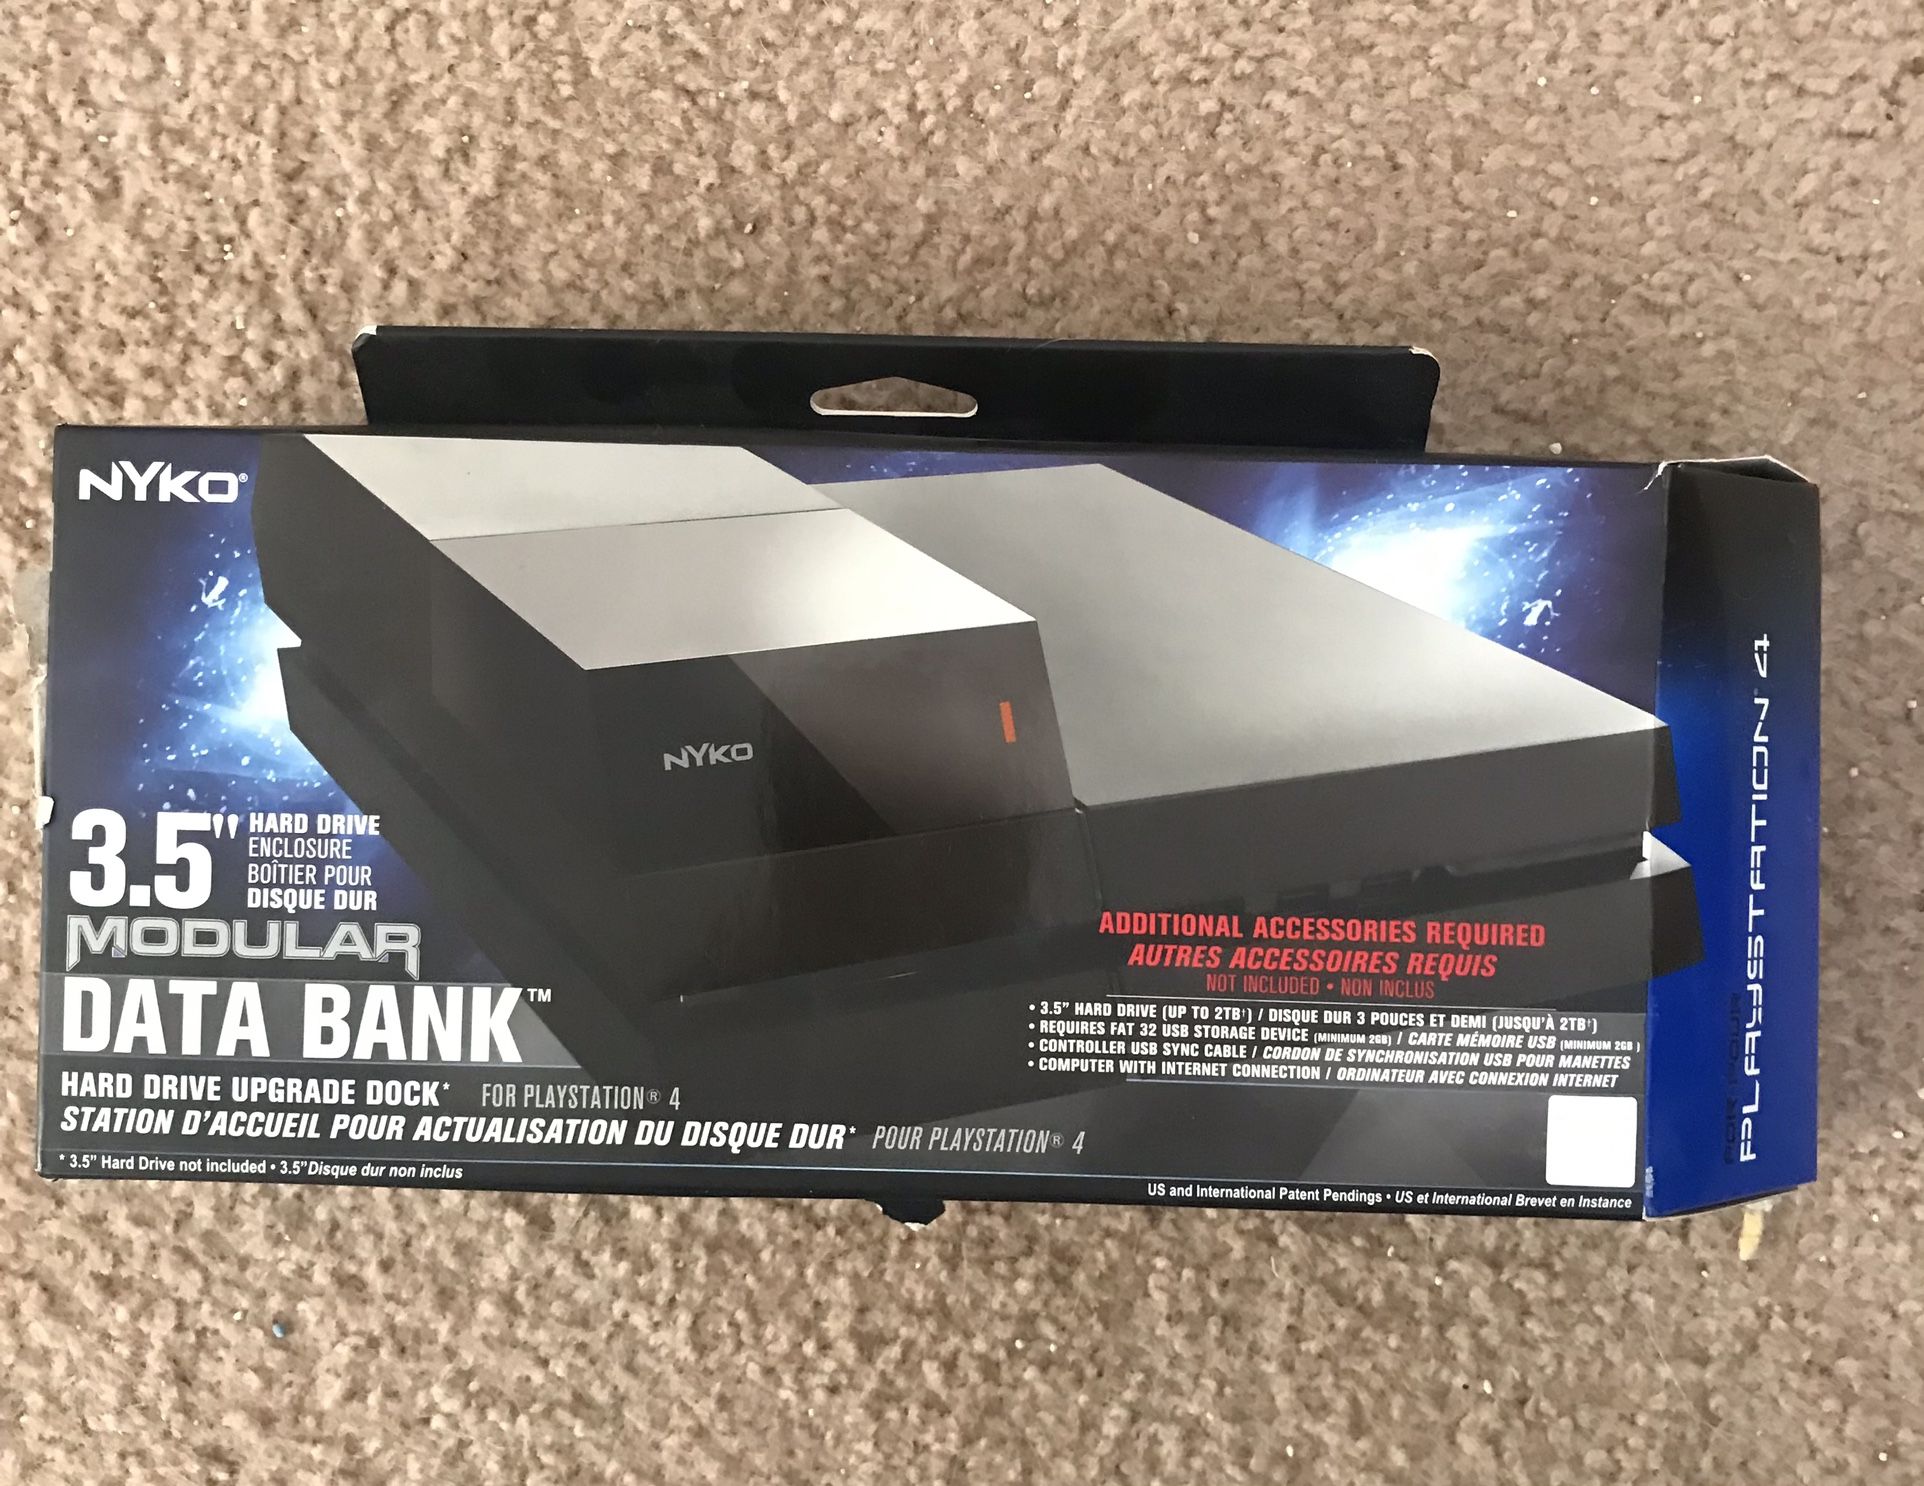 Nyko Data Bank For PS4 for in Las NV - OfferUp